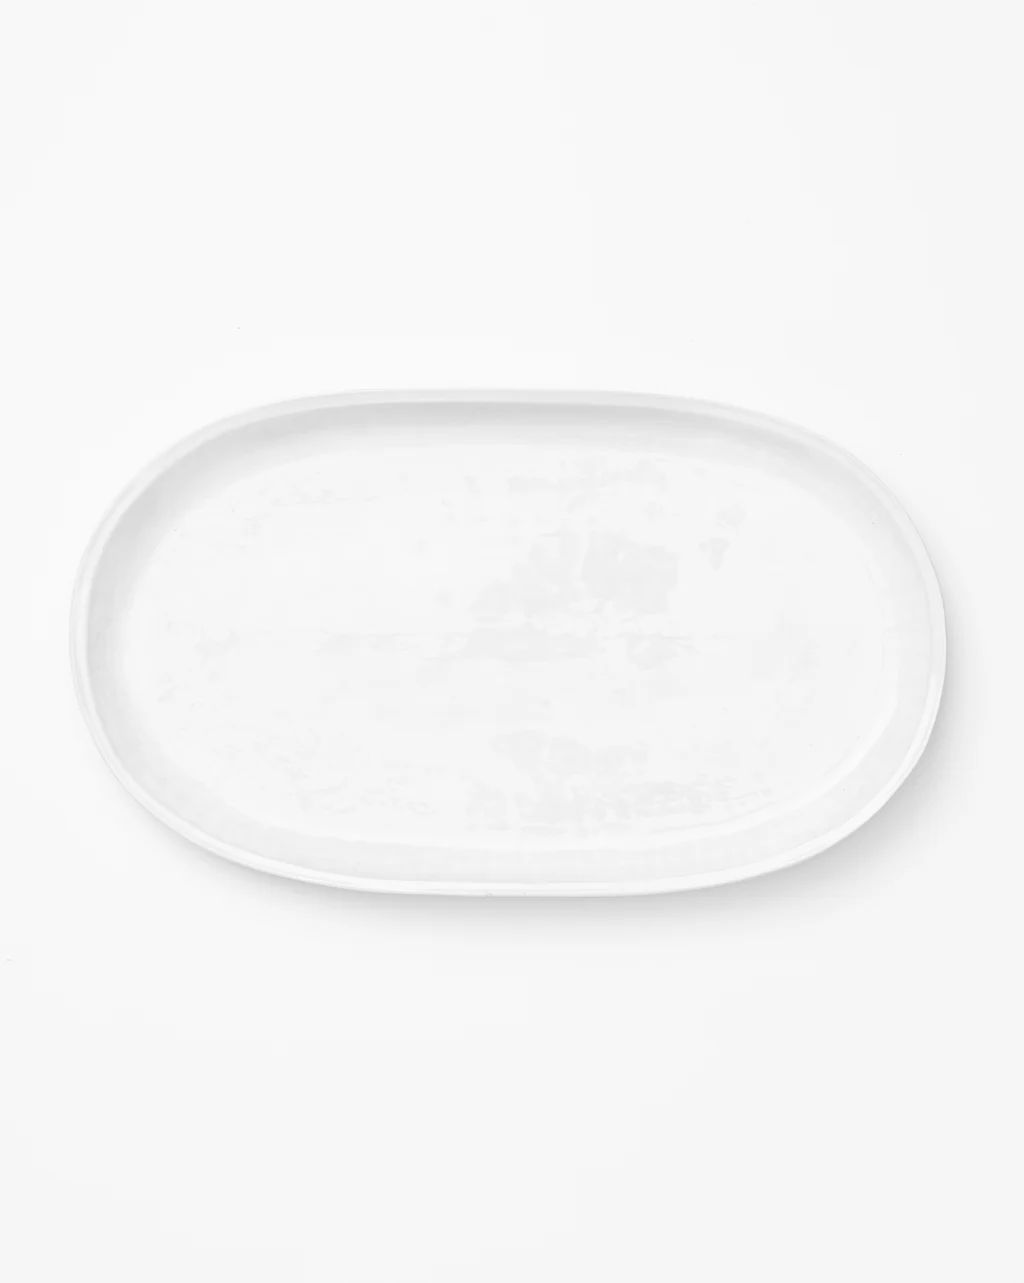 Aiden Oval Platter | McGee & Co.